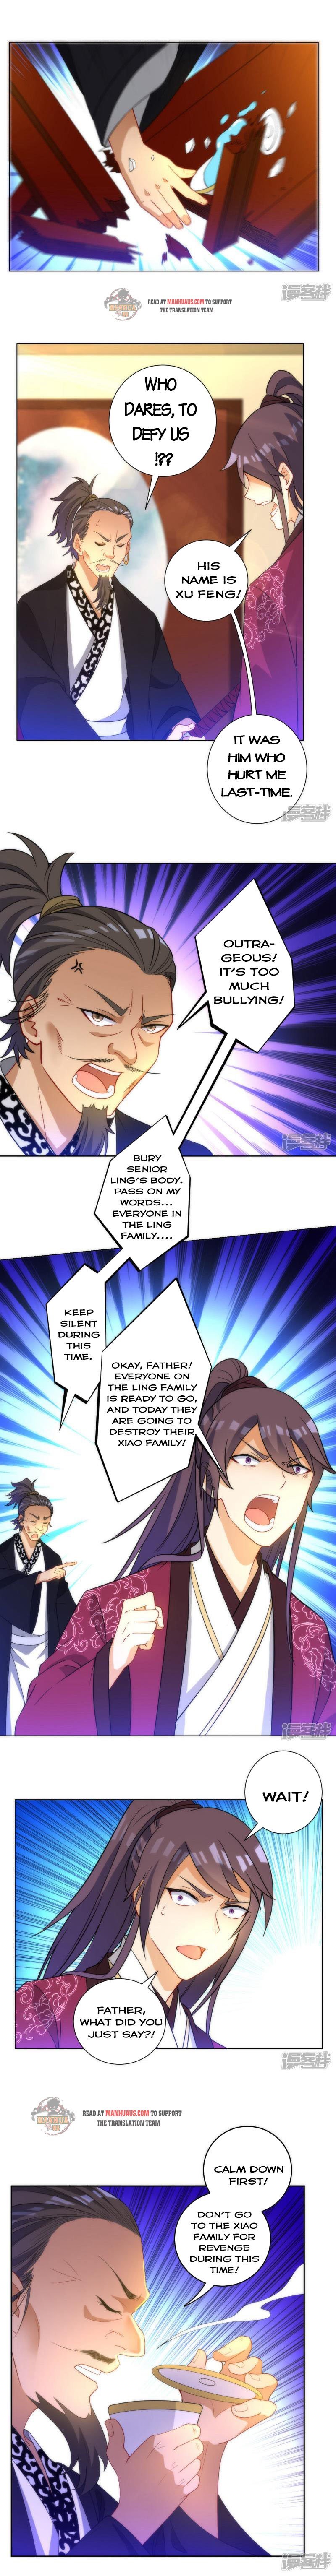 First Class Servant - Page 1